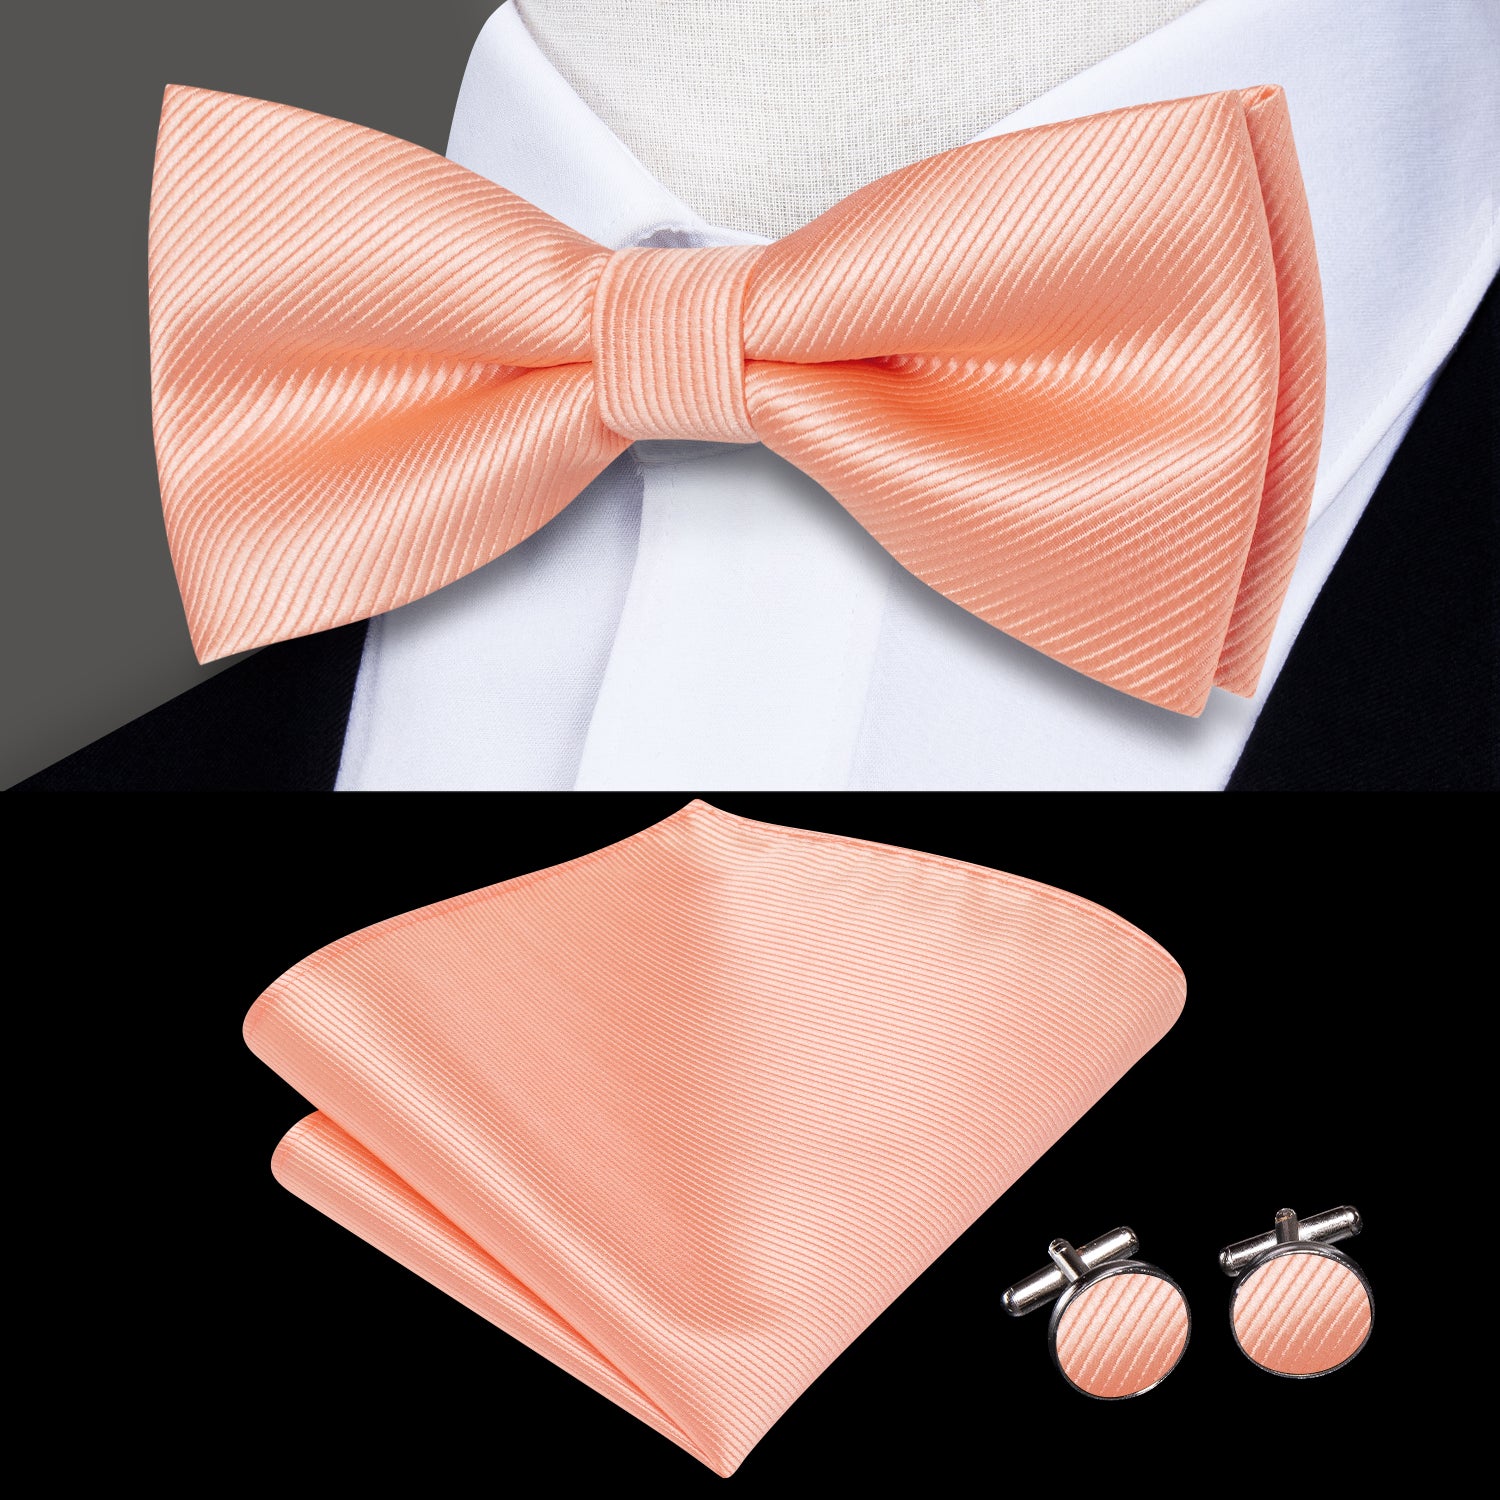 Coral Pink Striped Pre-tied Bow Tie Hanky Cufflinks Set